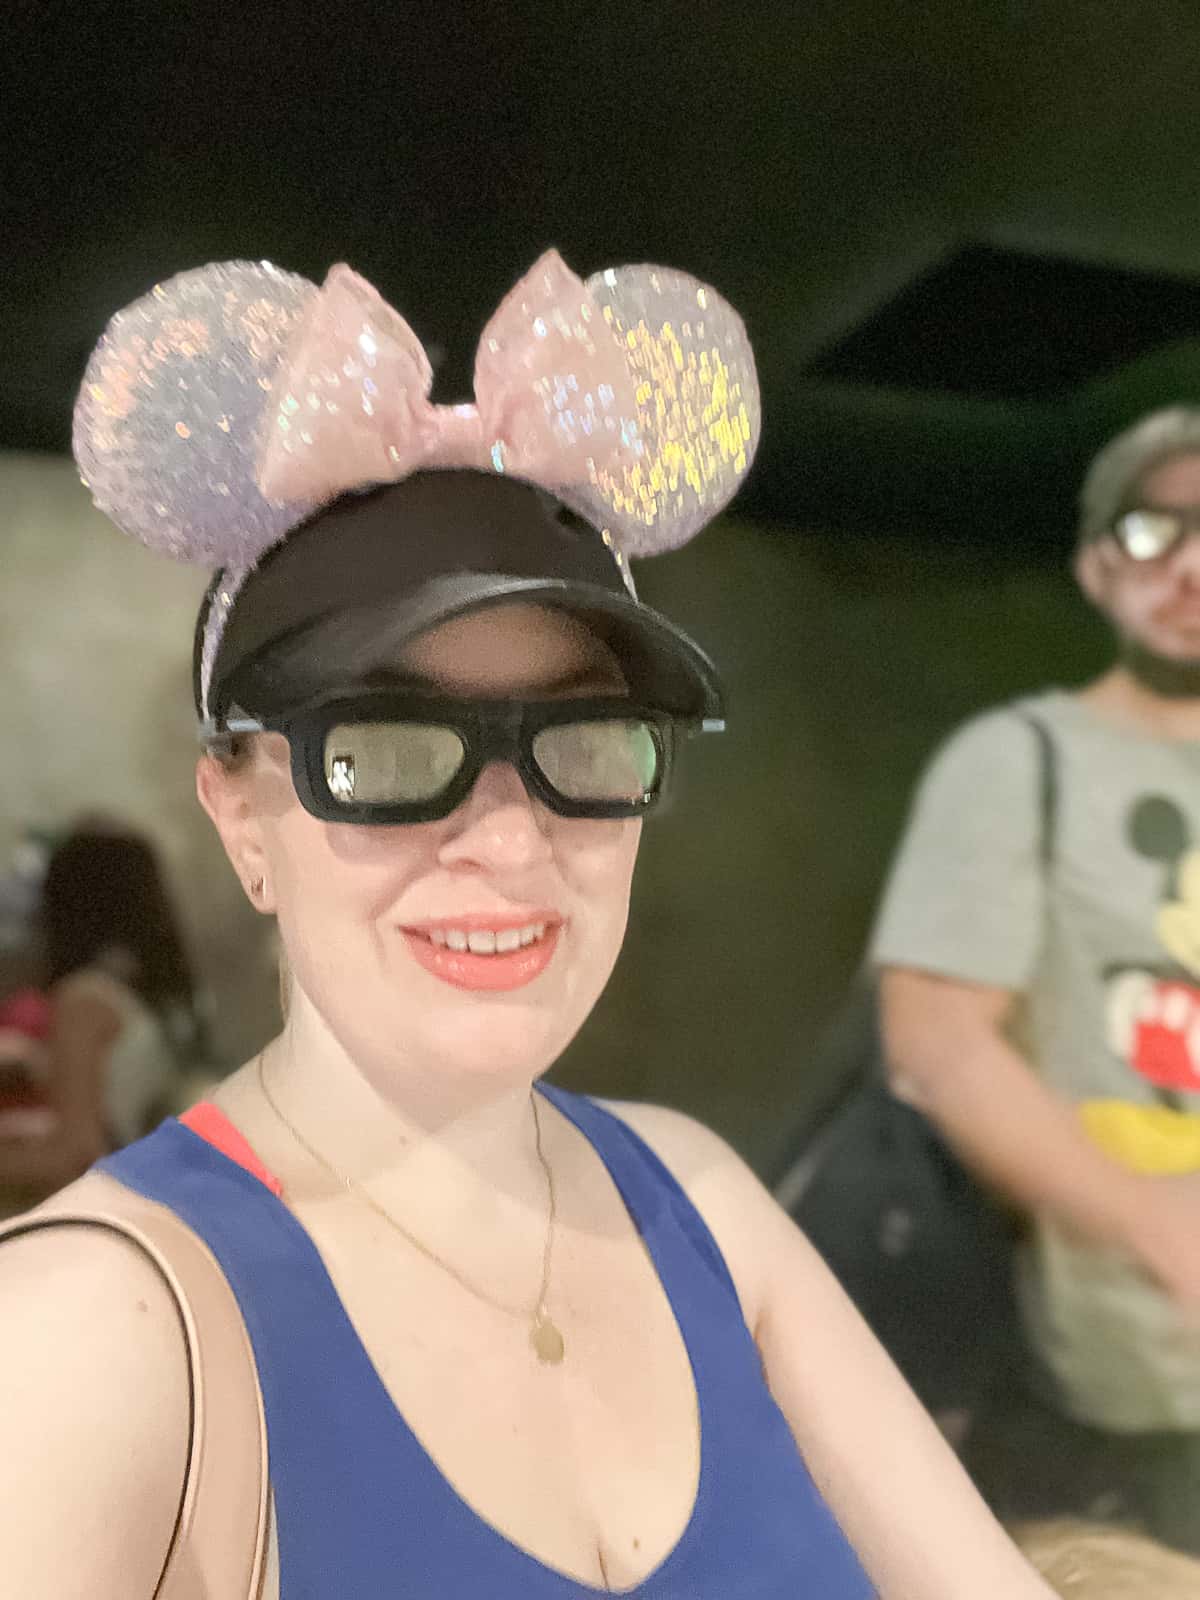 Wearing 3D glasses Travel Blogger at Remys Ratatouille Adventure Ride in Disney World Epcot Park